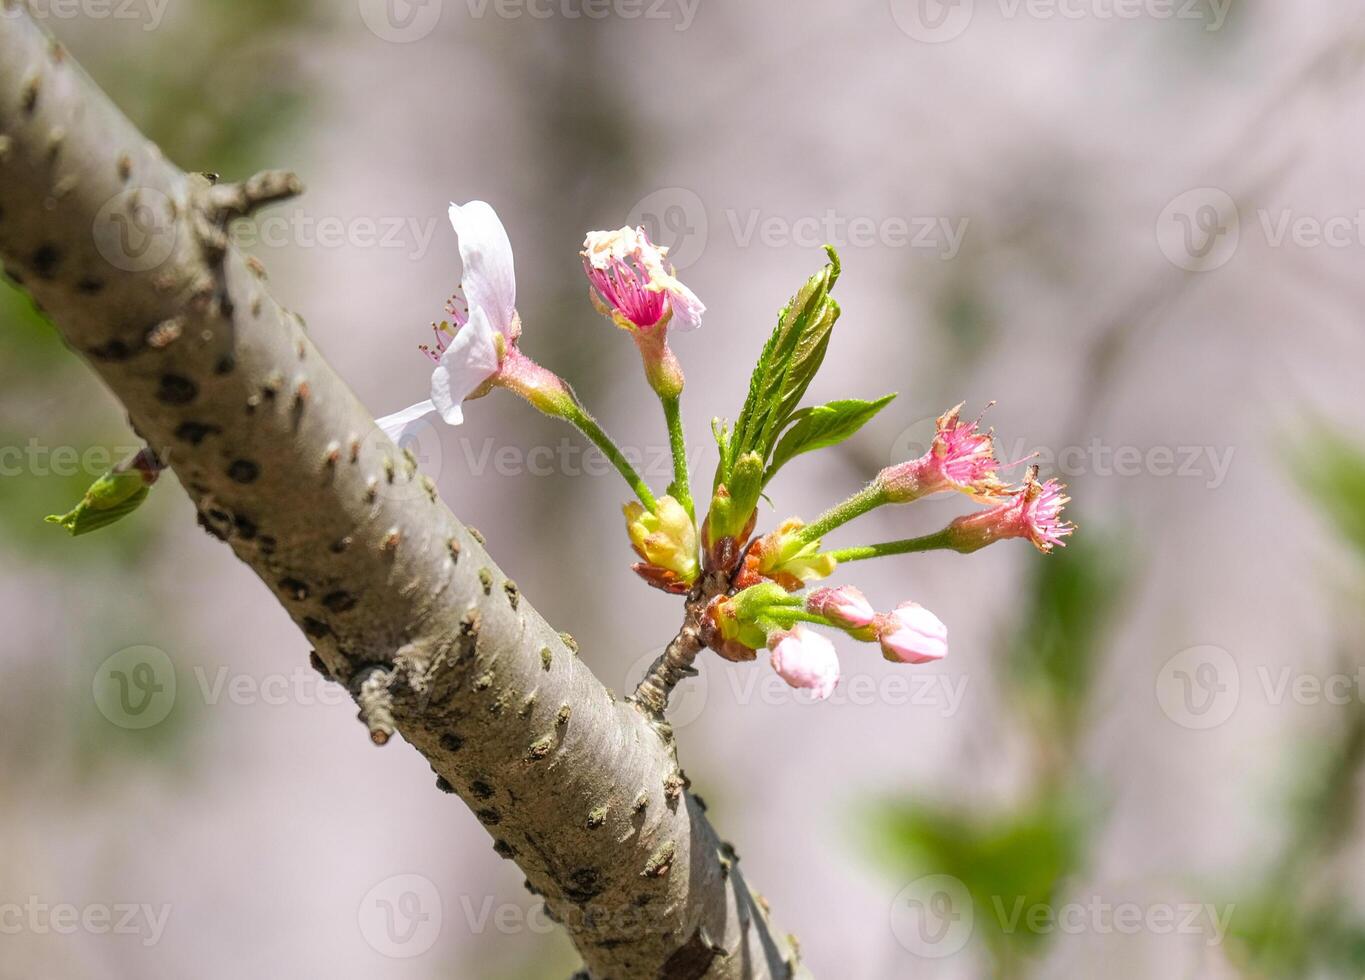 caterpillars worm eat beauty pink Japanese cherry blossoms flower or sakura bloomimg on the tree branch. damage small fresh buds and many petals layer romantic flora in botany garden park photo